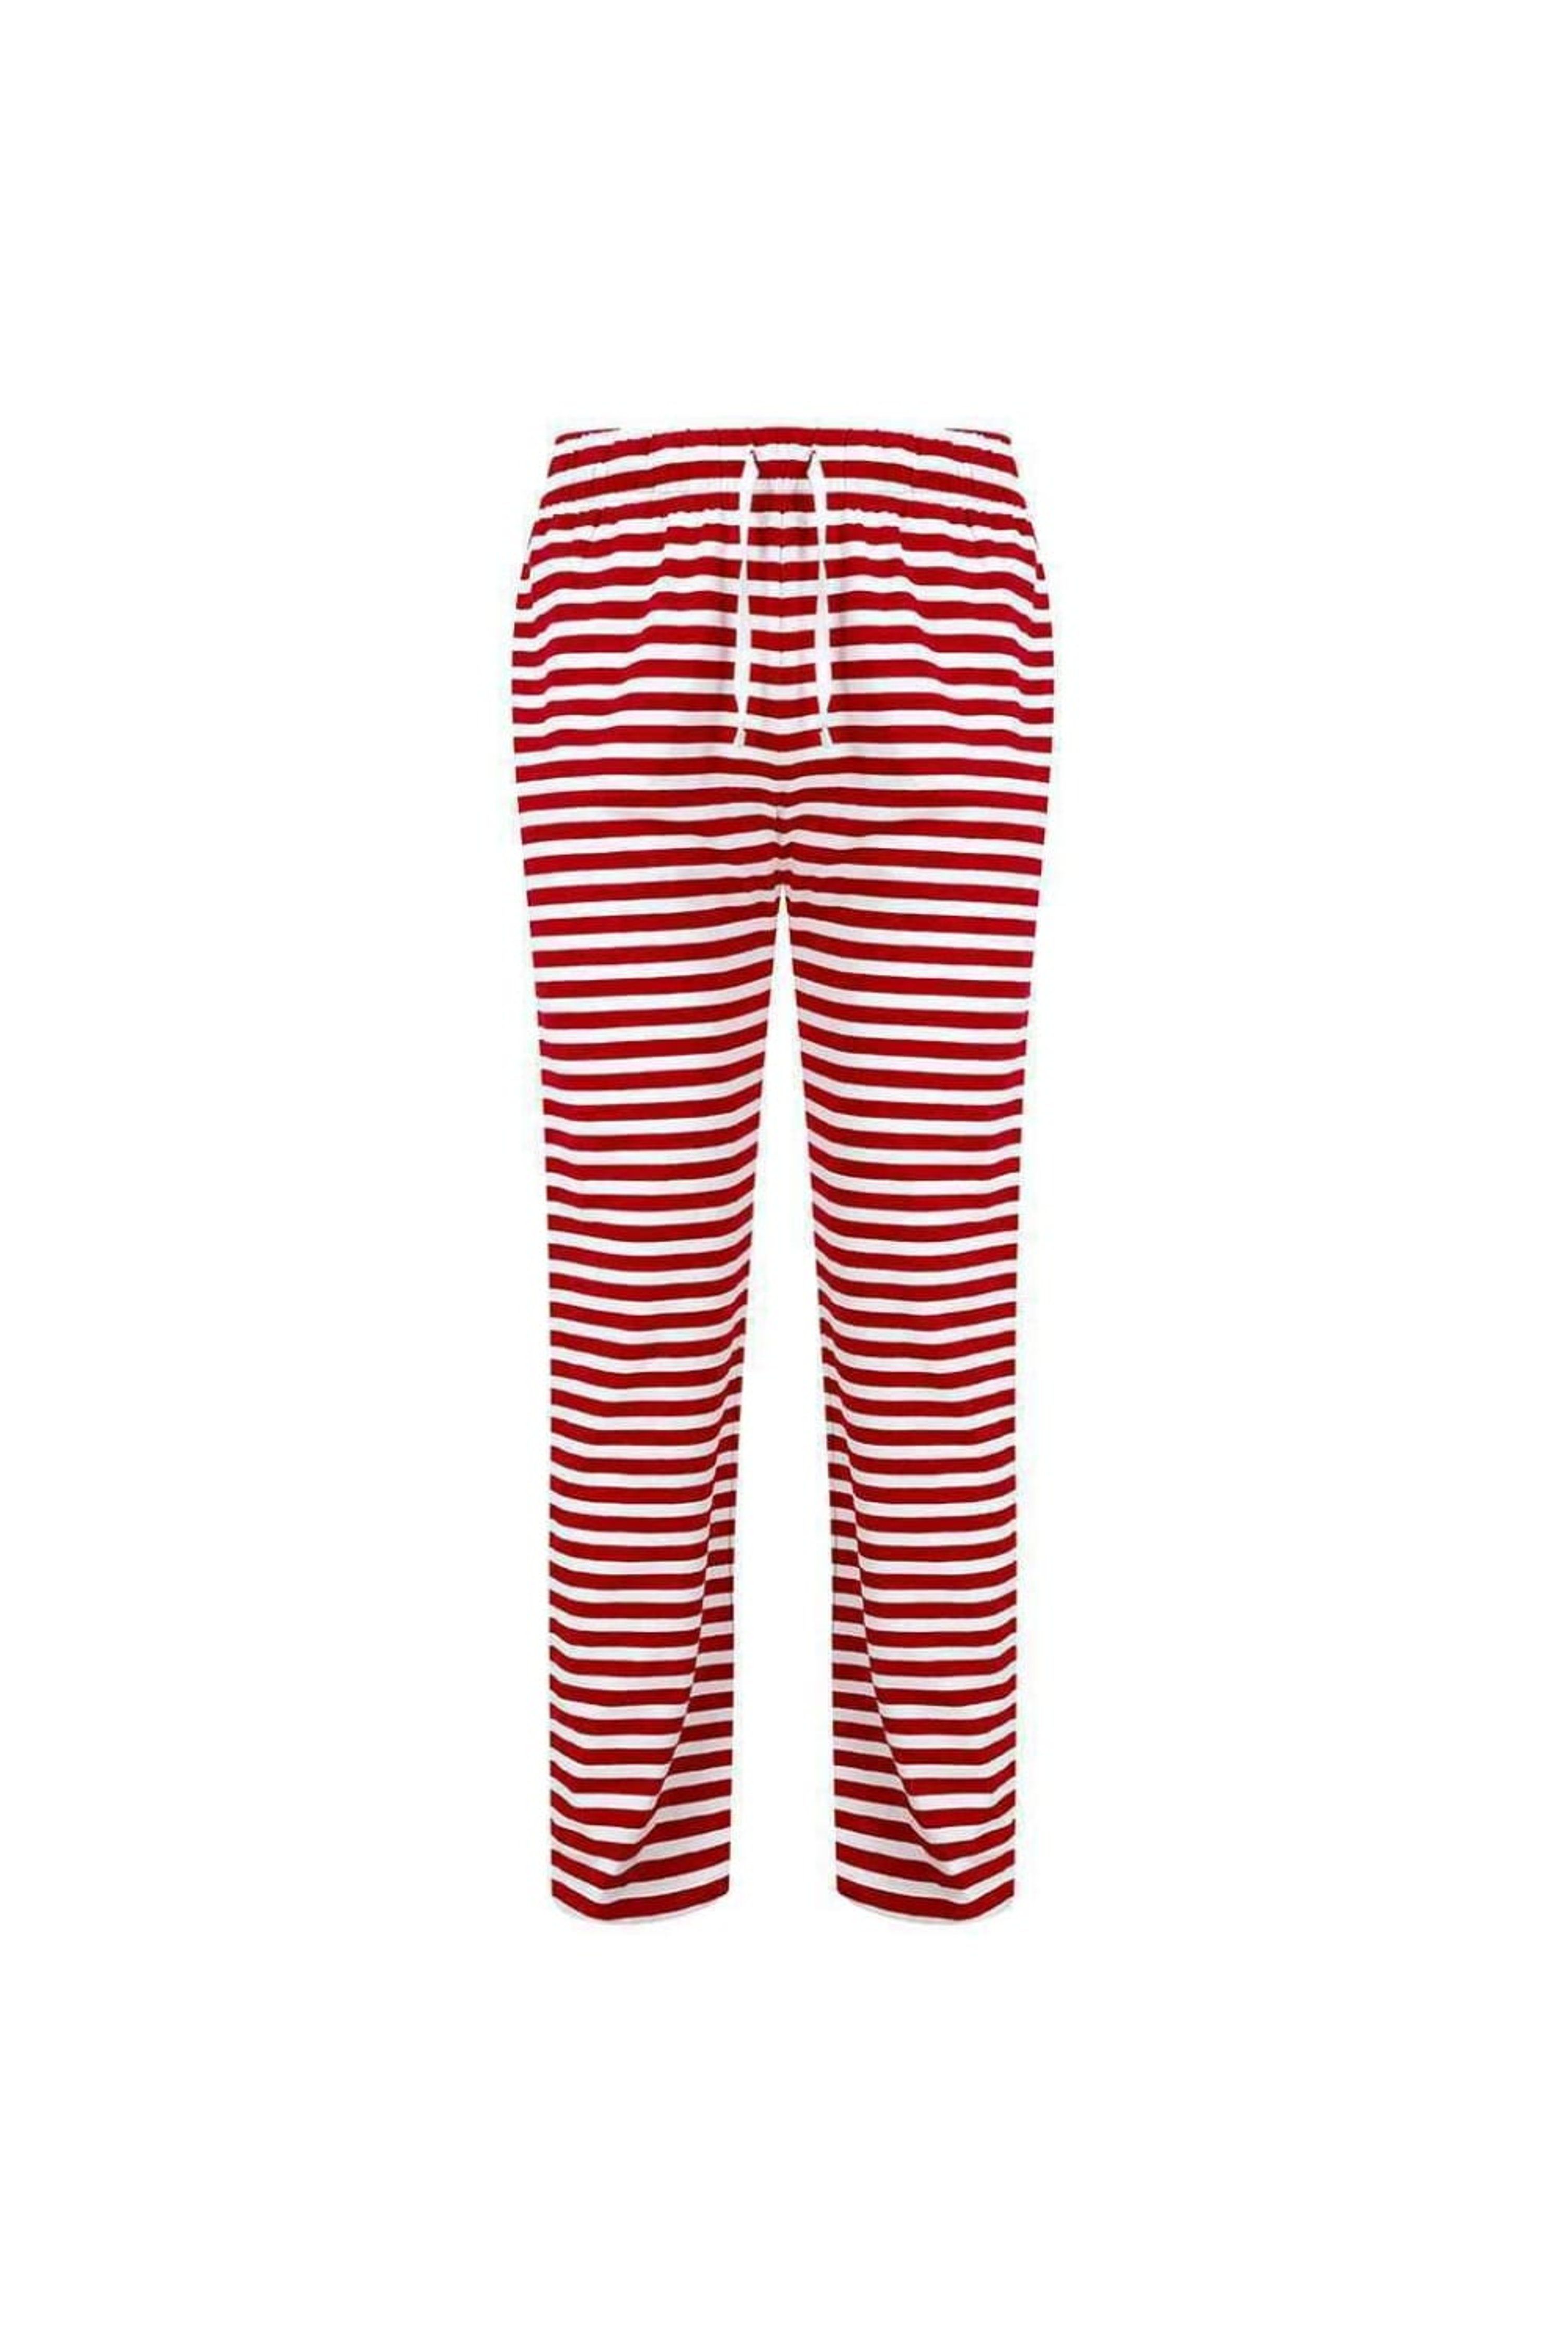 Skinni Fit Mens Lounge Pants (Red/White) - XL - Also in: XS, M, S | Verishop